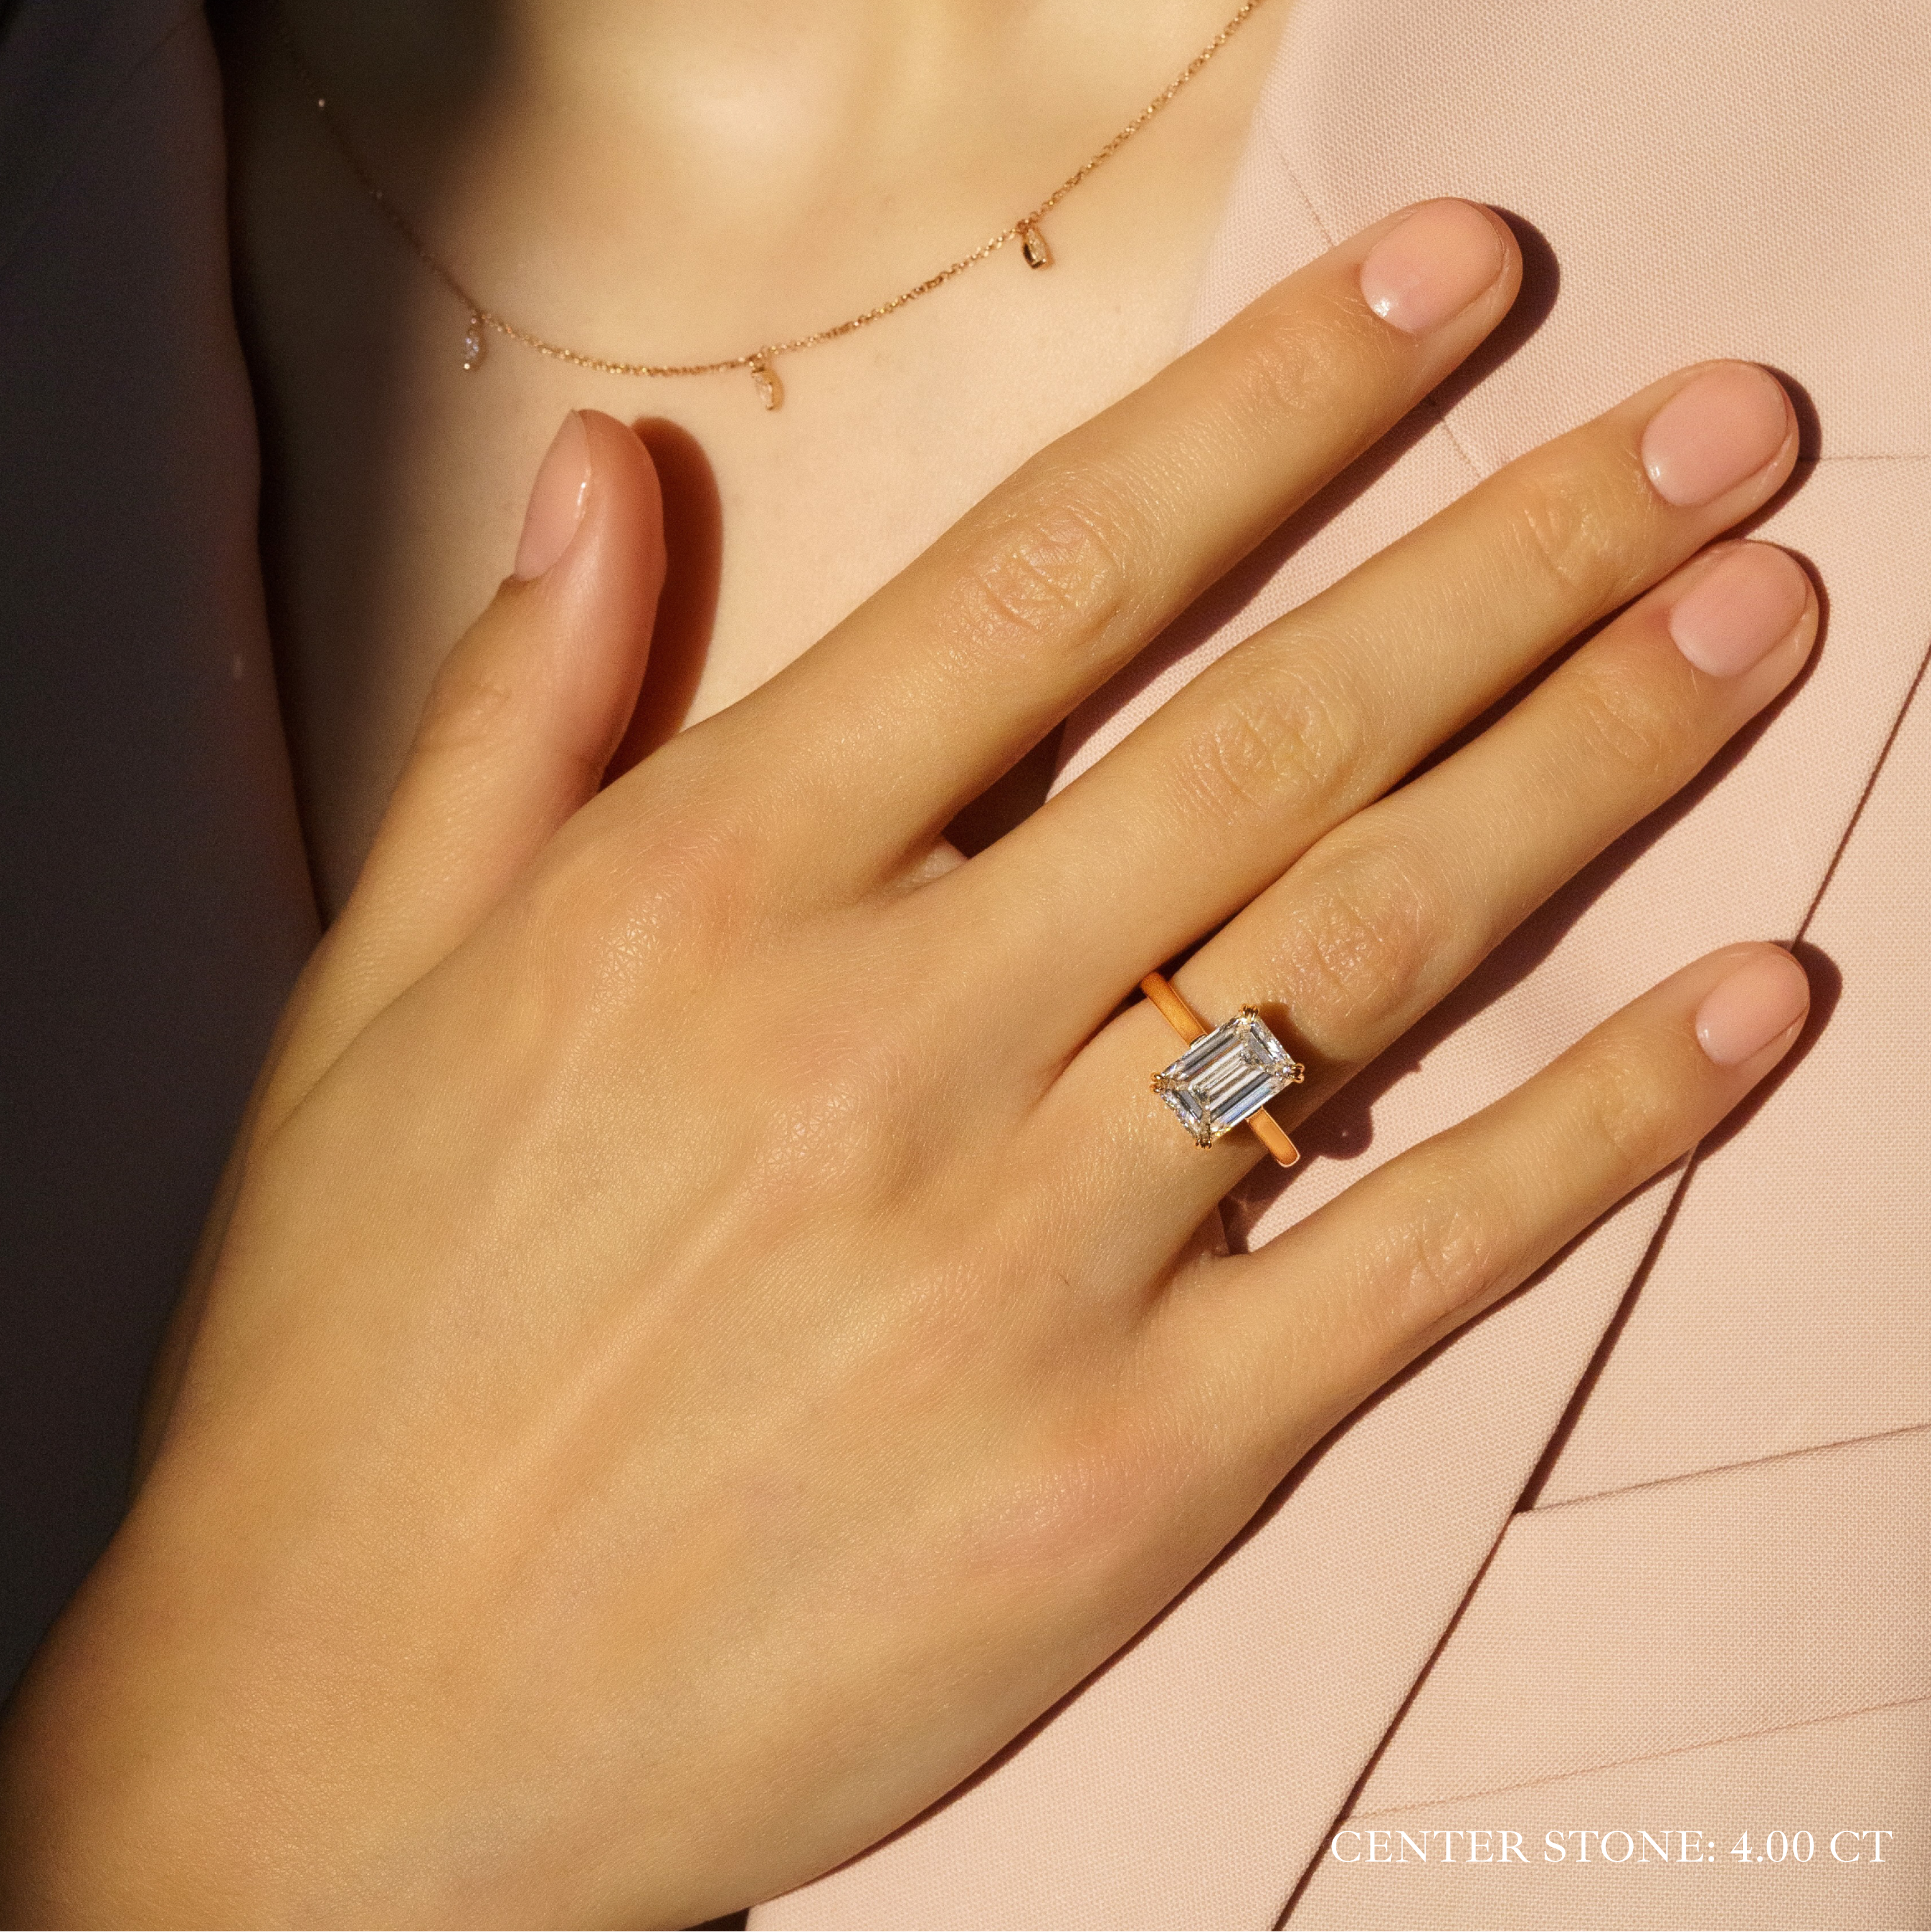 LEO'S PERFECT SOLITAIRE SETTING© emerald cut rose gold